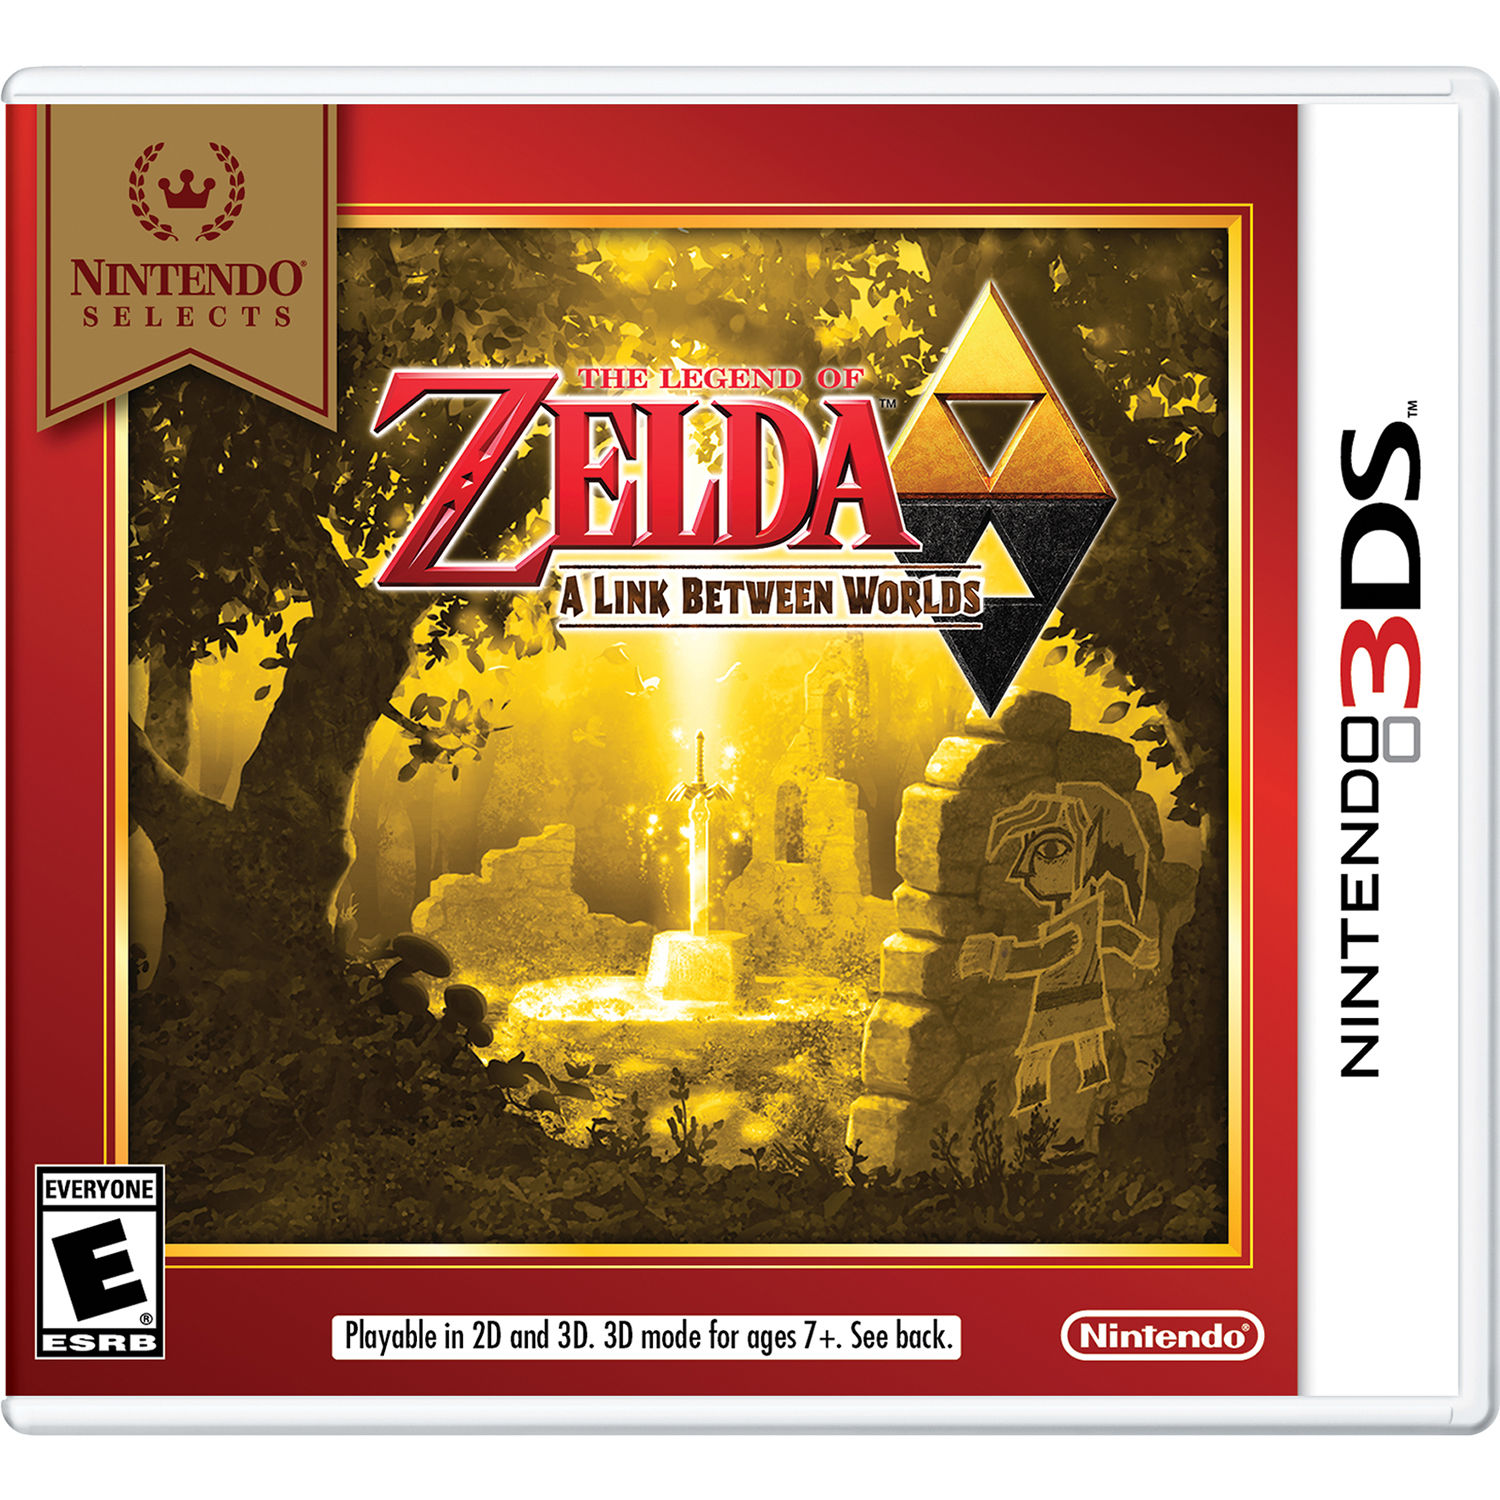 nintendo selects 3ds